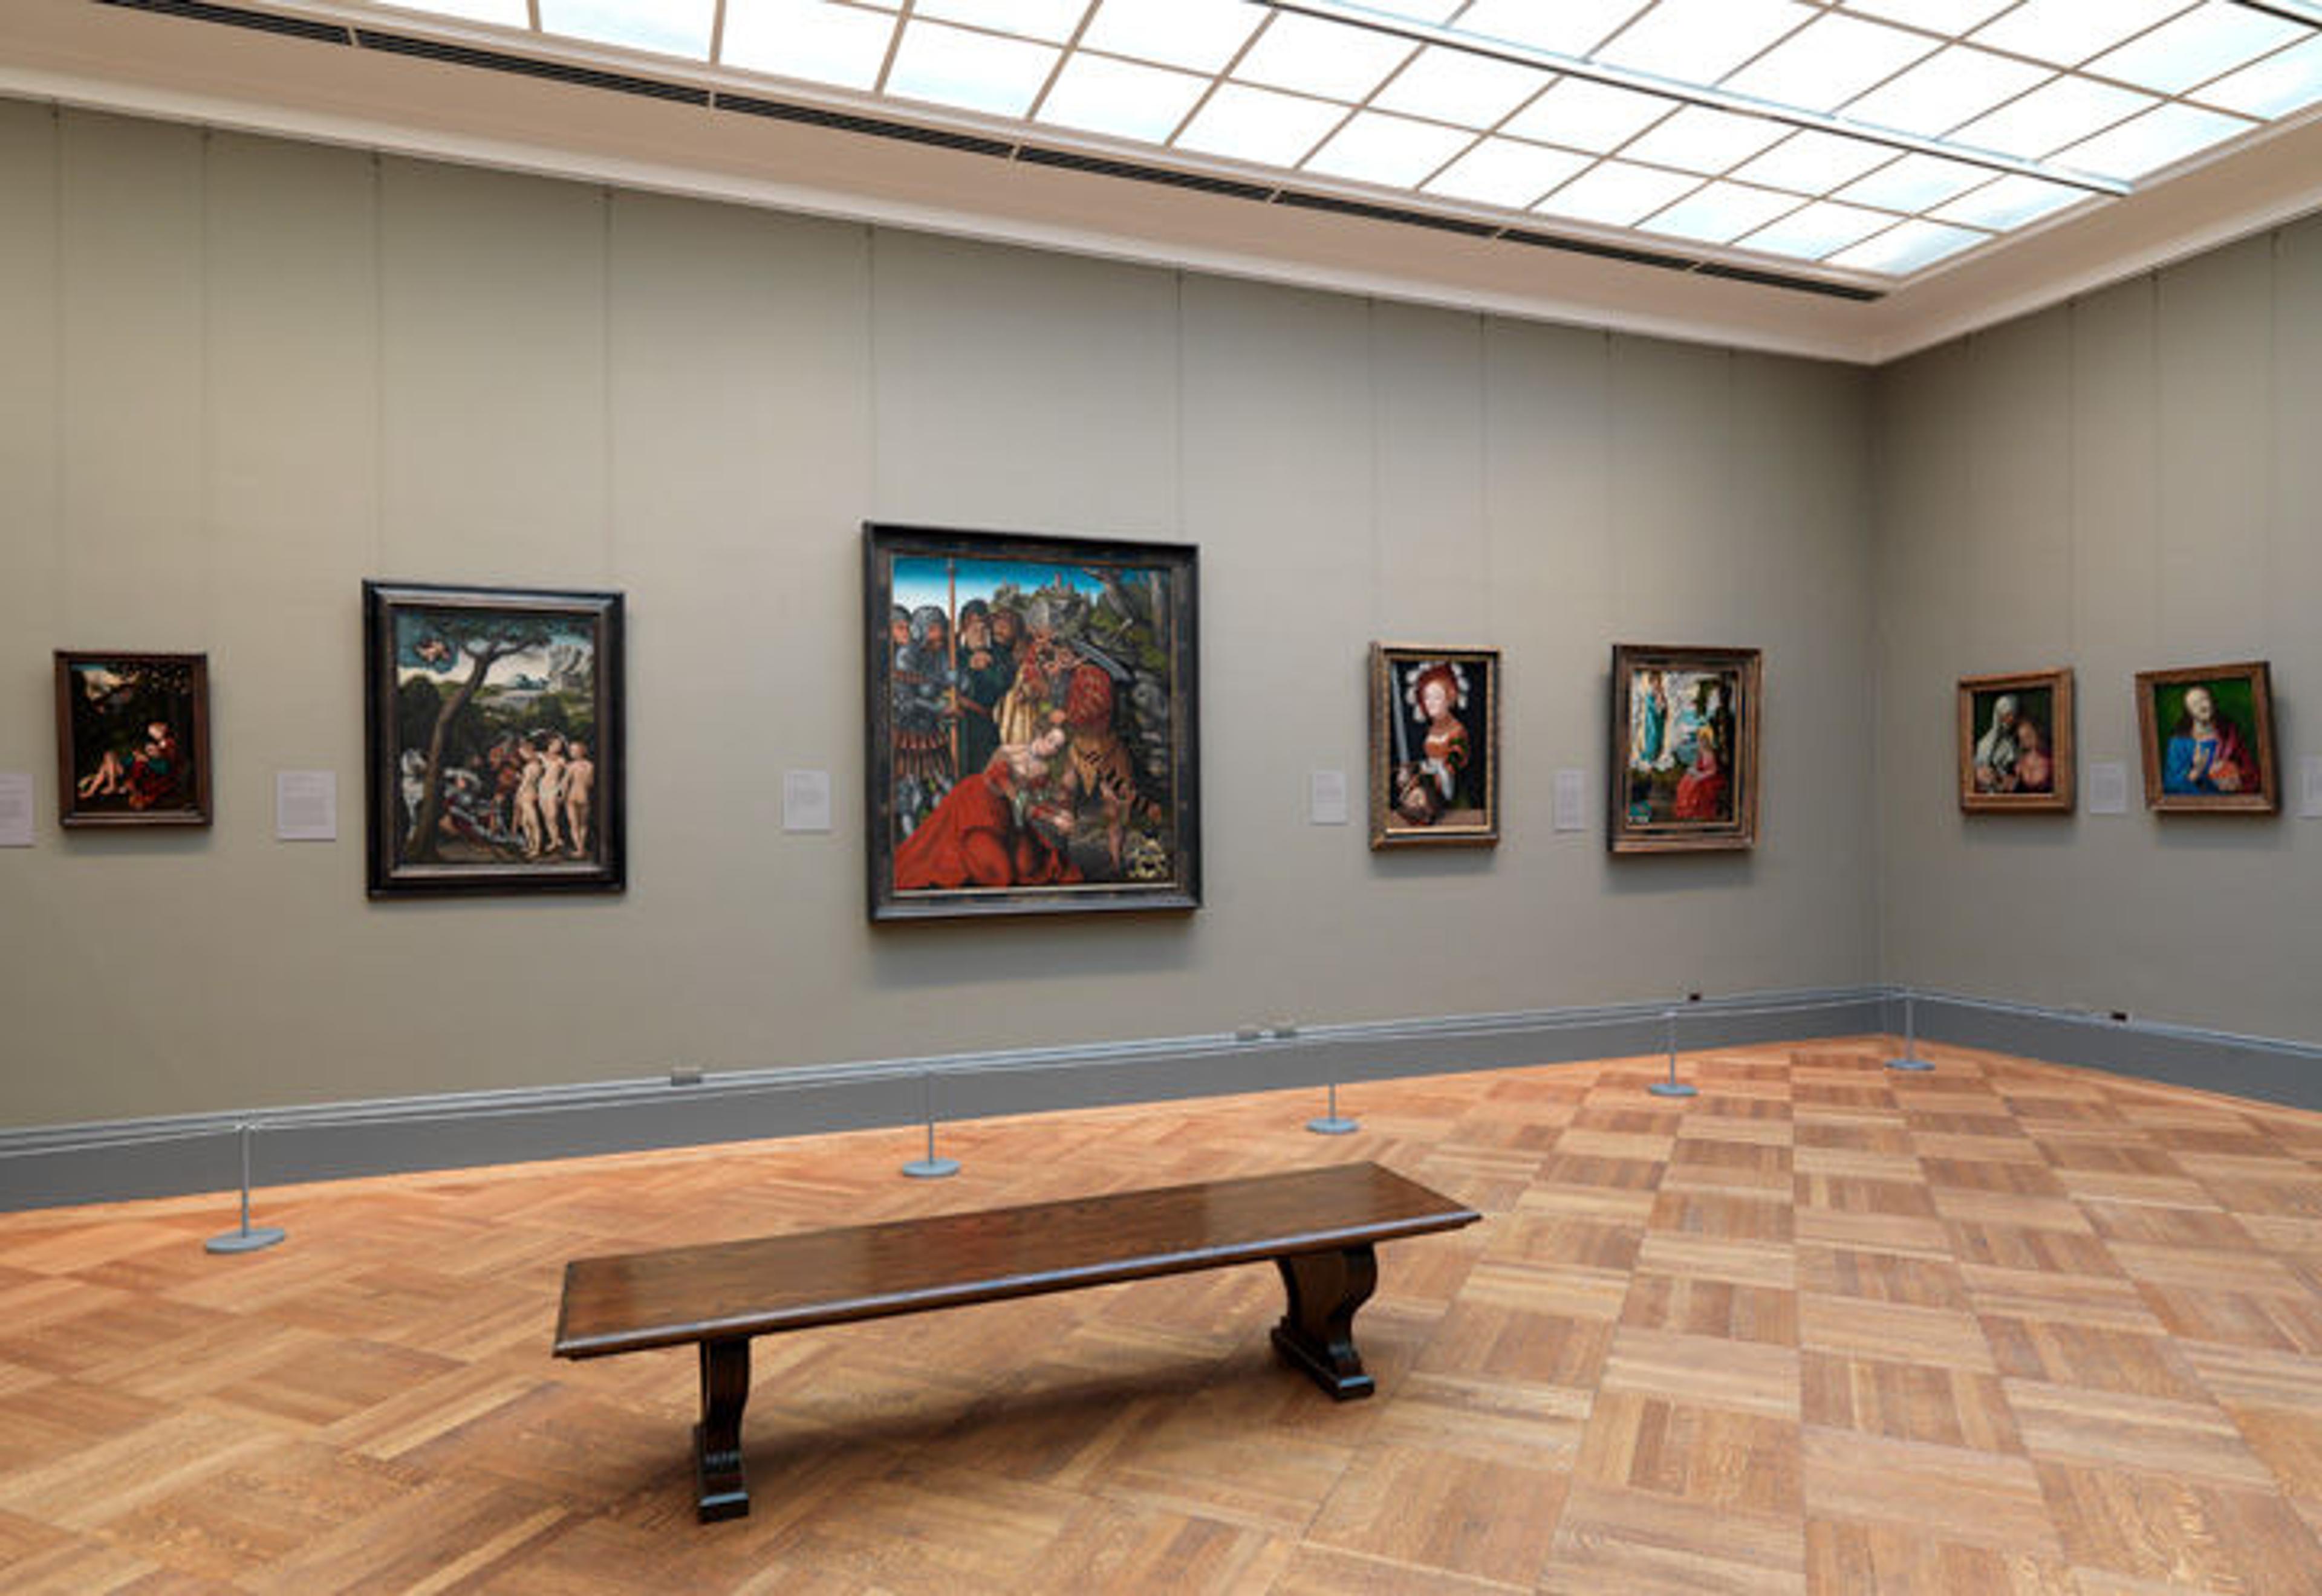 View of a gallery of European paintings illuminated by skylights